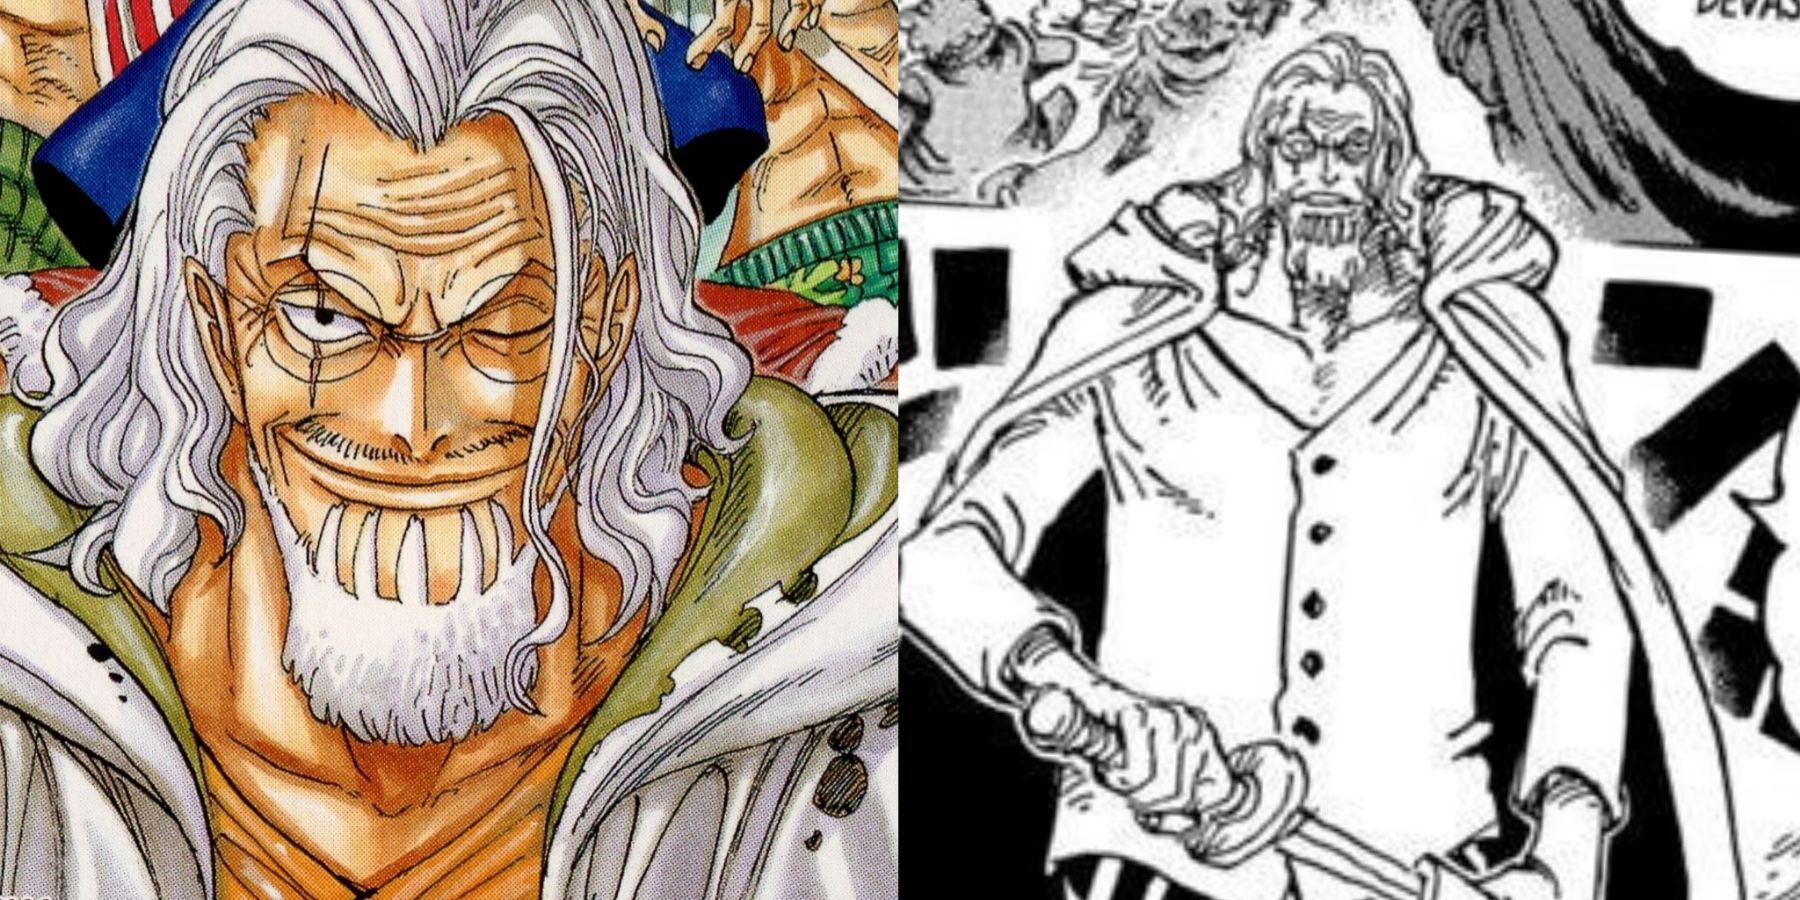 A 0NE PIECE GAME HOW TO FIND RAYLEIGH 